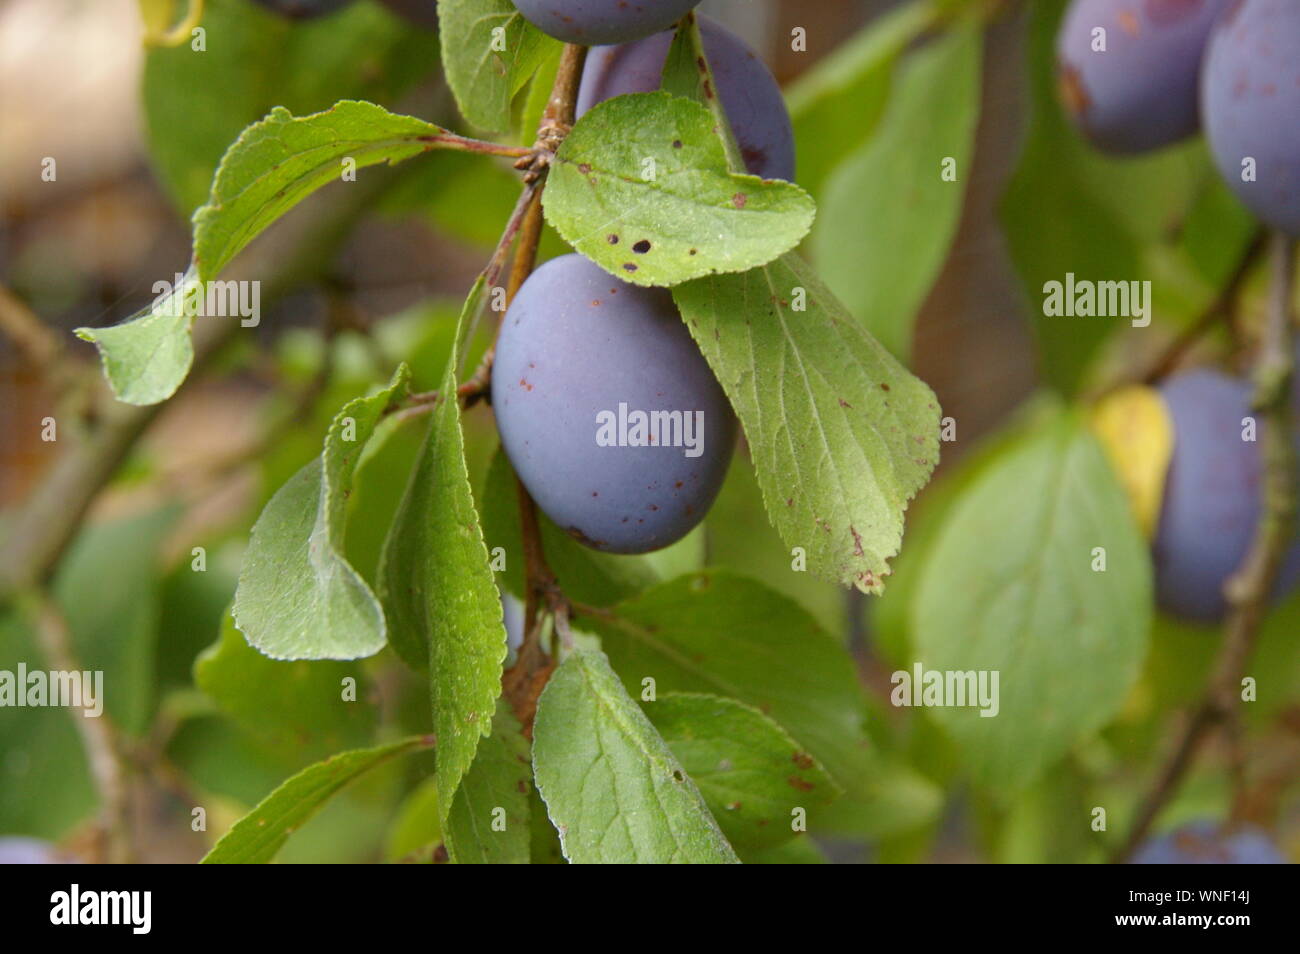 Closeup of plum on branch plum fruit hanging from tree orchard Nahaufnahme von Pflaume an Ast Obstbaum Stock Photo